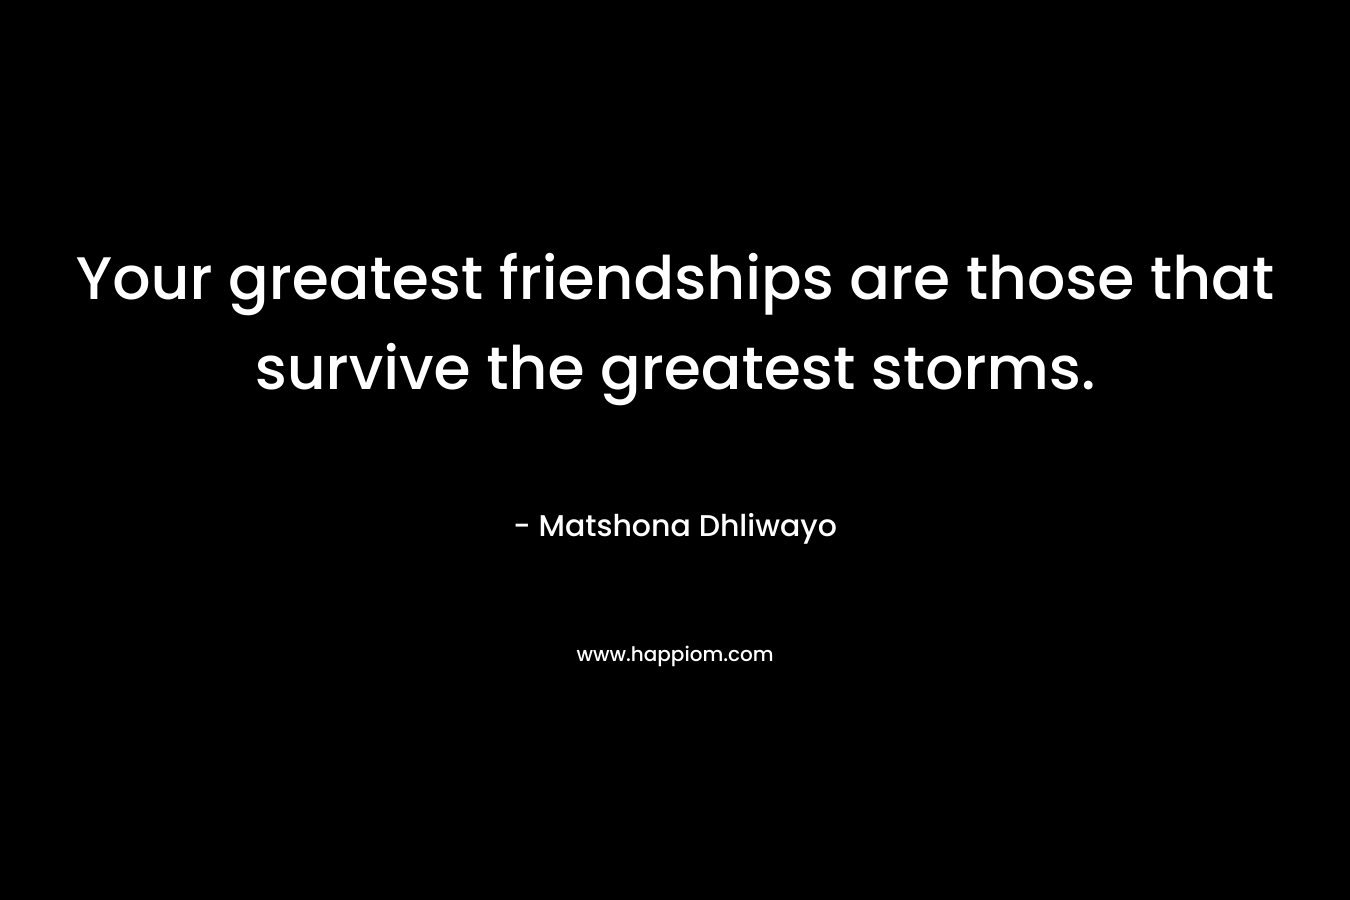 Your greatest friendships are those that survive the greatest storms. – Matshona Dhliwayo